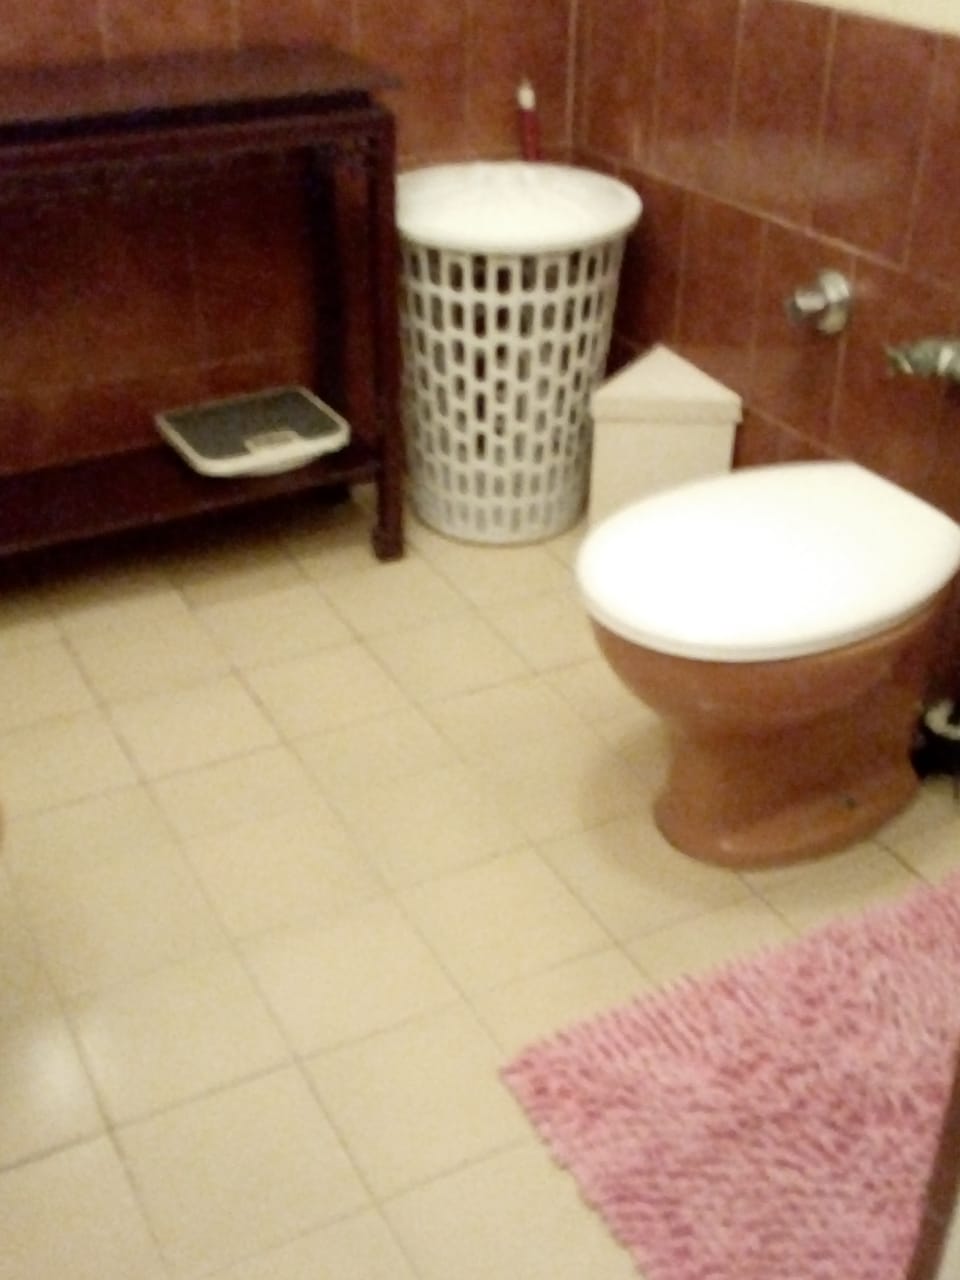 shelf, dirty clothes basket, toilet and carpet before the shower box, ready for guests